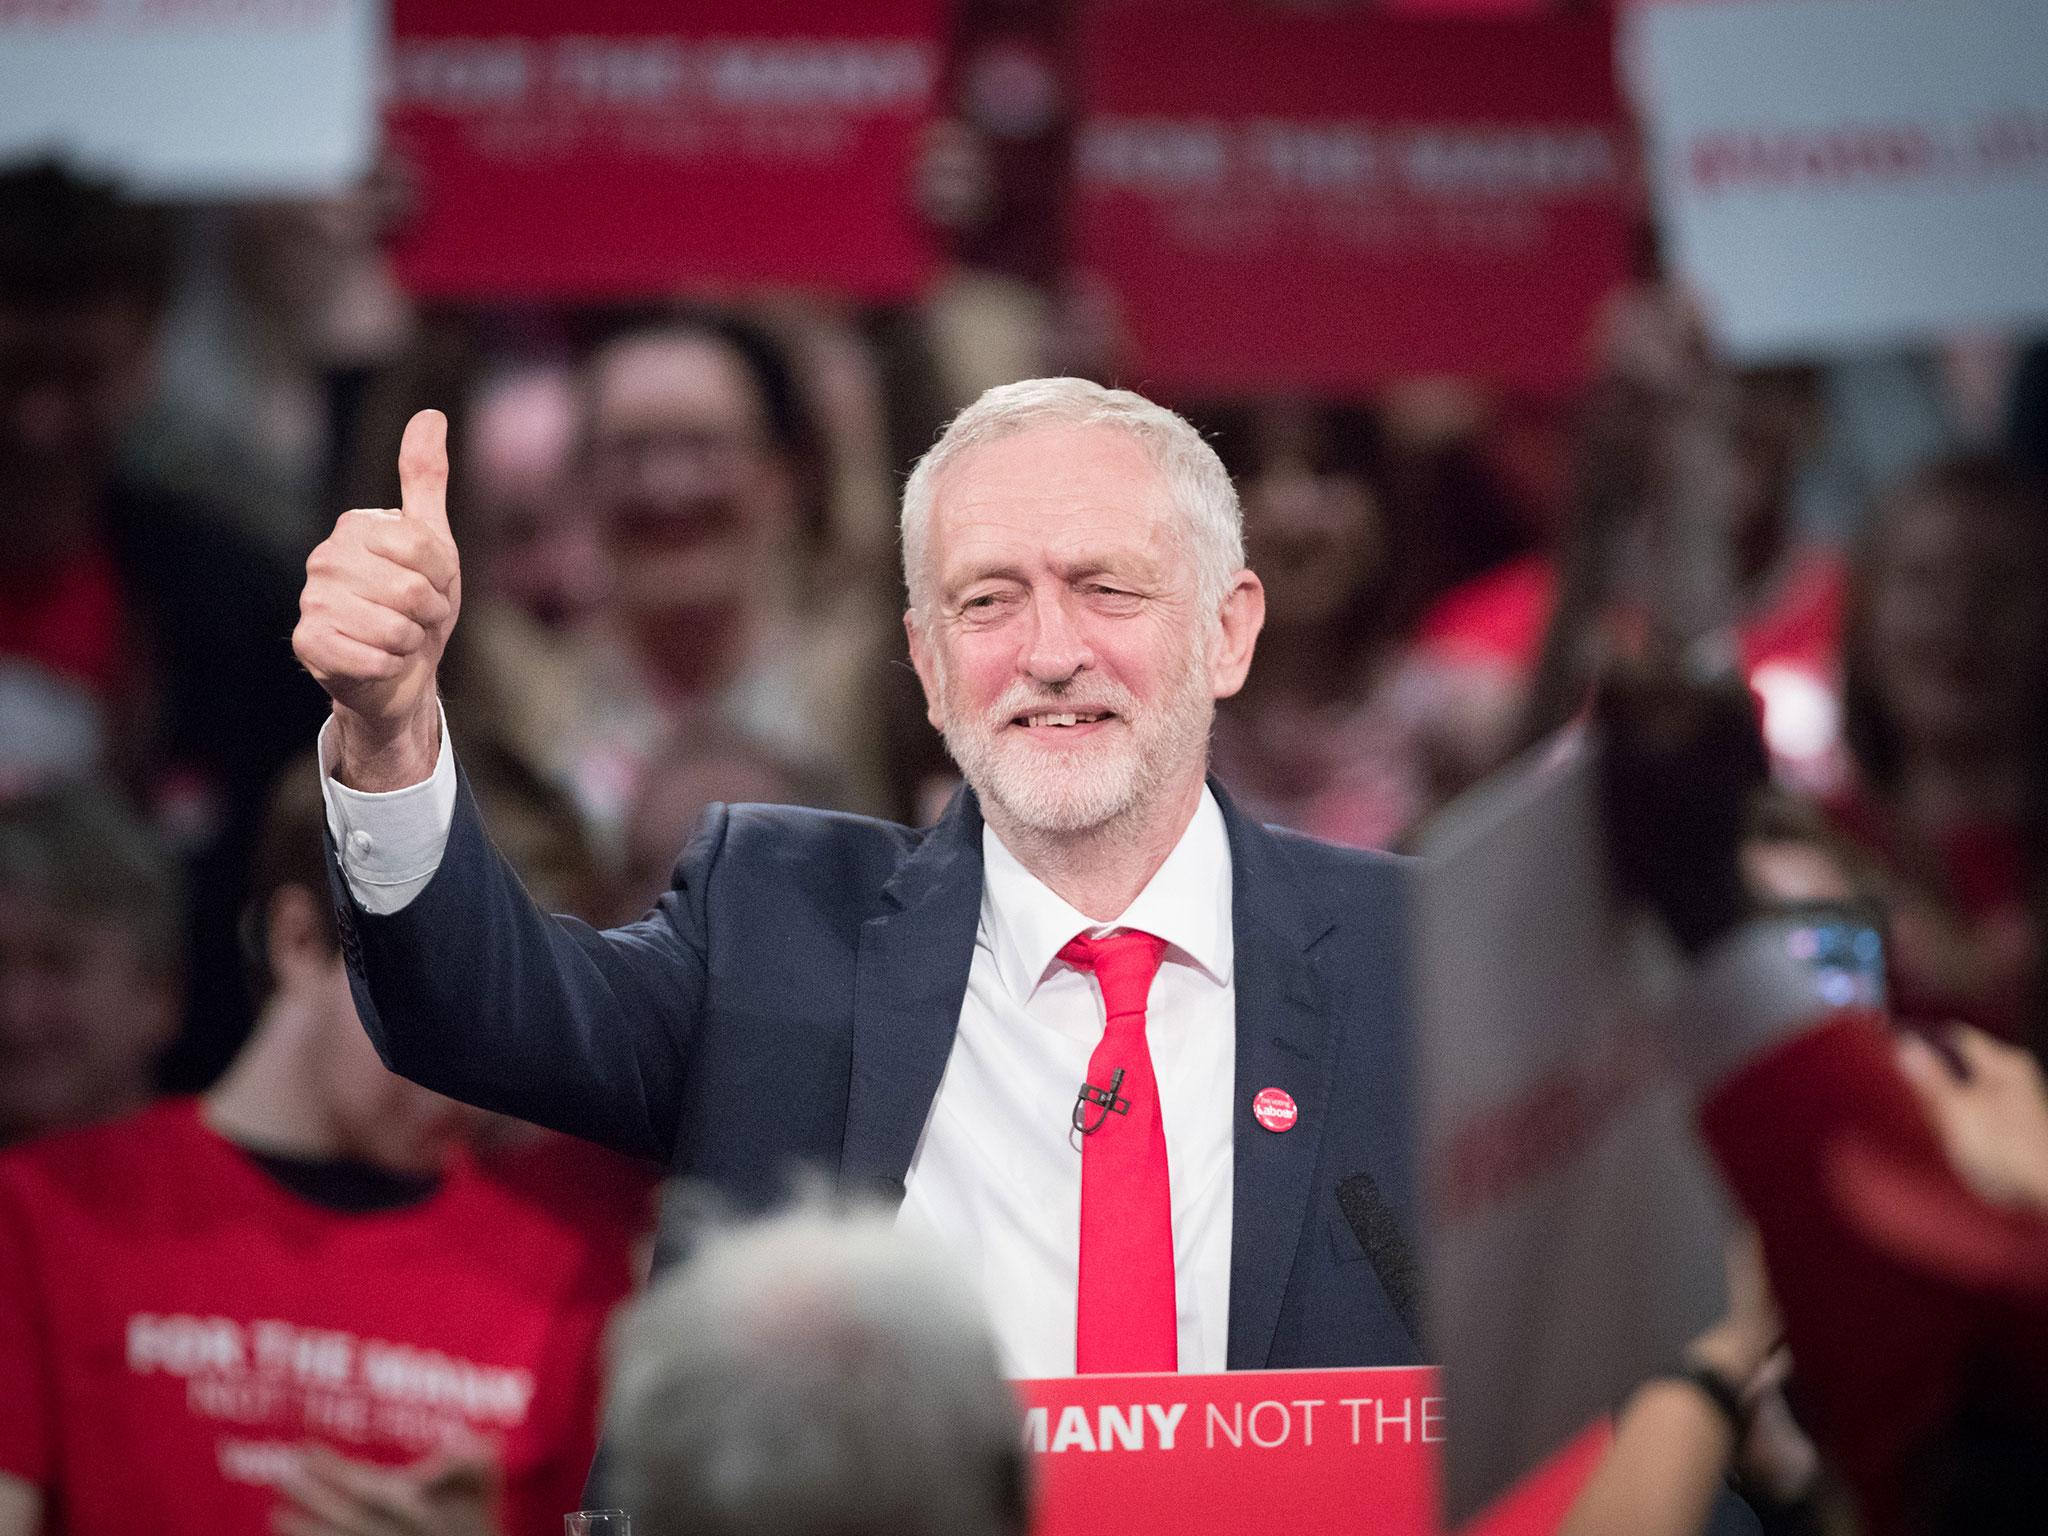 Jeremy Corbyn hs struggled to appeal to older voters, but is attempting to woo pensioners after the Tory manifesto angered many with its social care shake-up